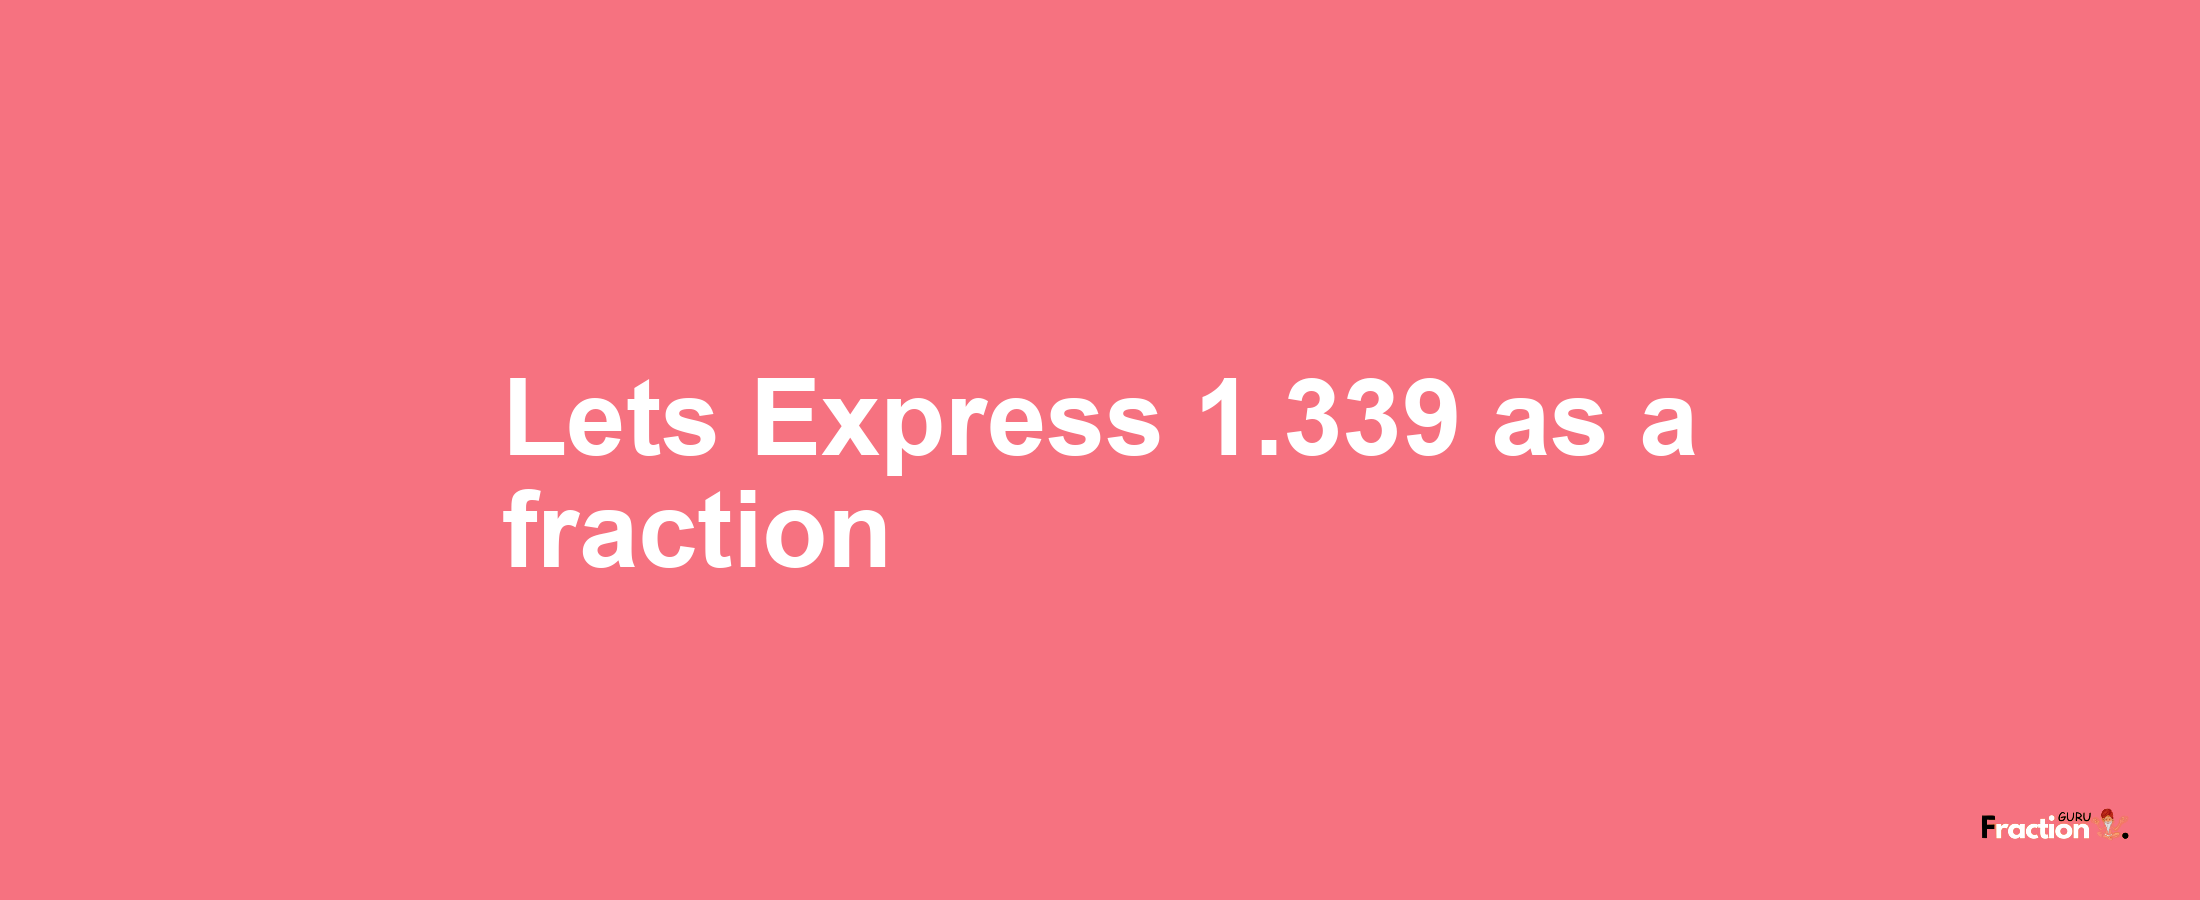 Lets Express 1.339 as afraction